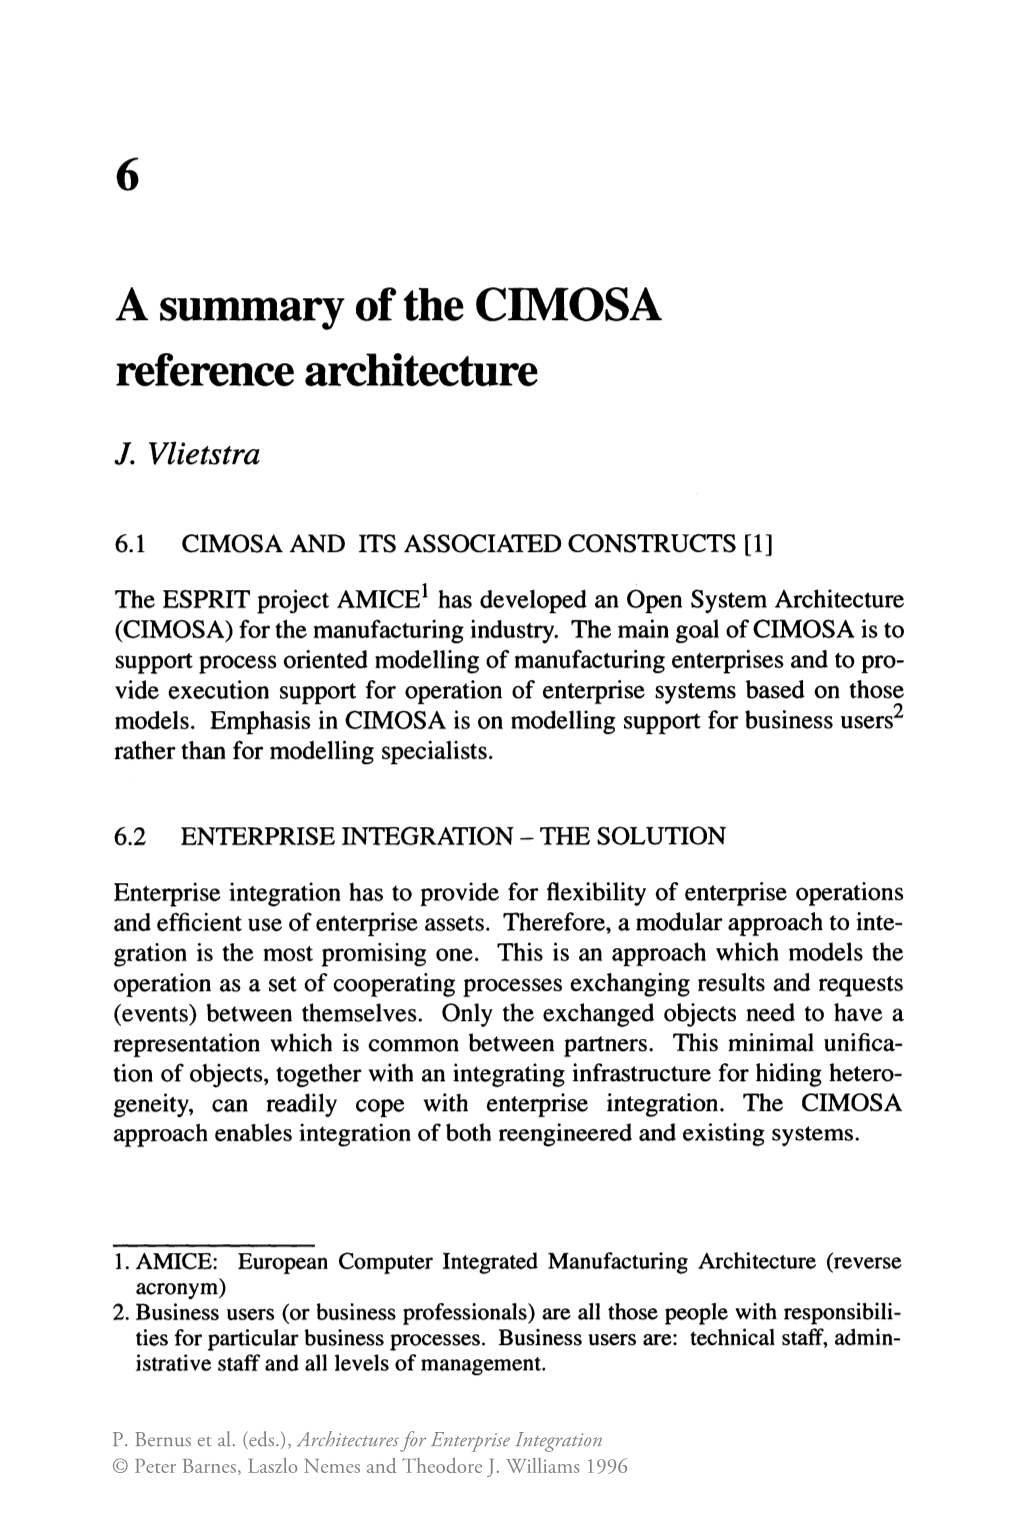 6 a Summary of the CIMOSA Reference Architecture 6.9 AMICE PROJECT